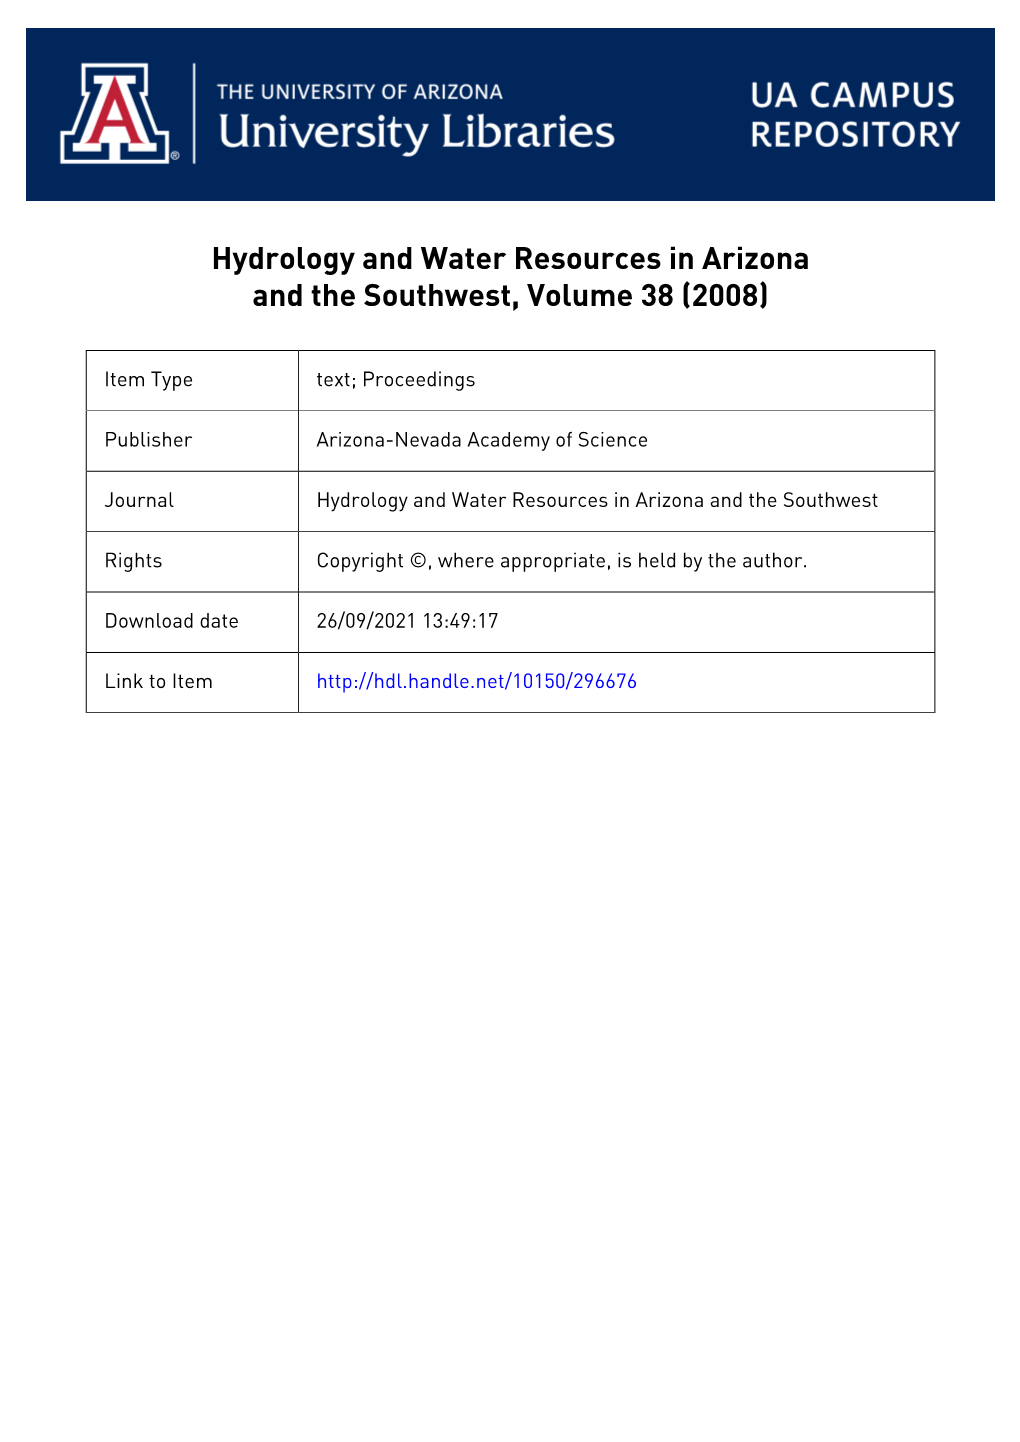 Hydrology and Water Resources in Arizona and the Southwest, Volume 38 (2008)